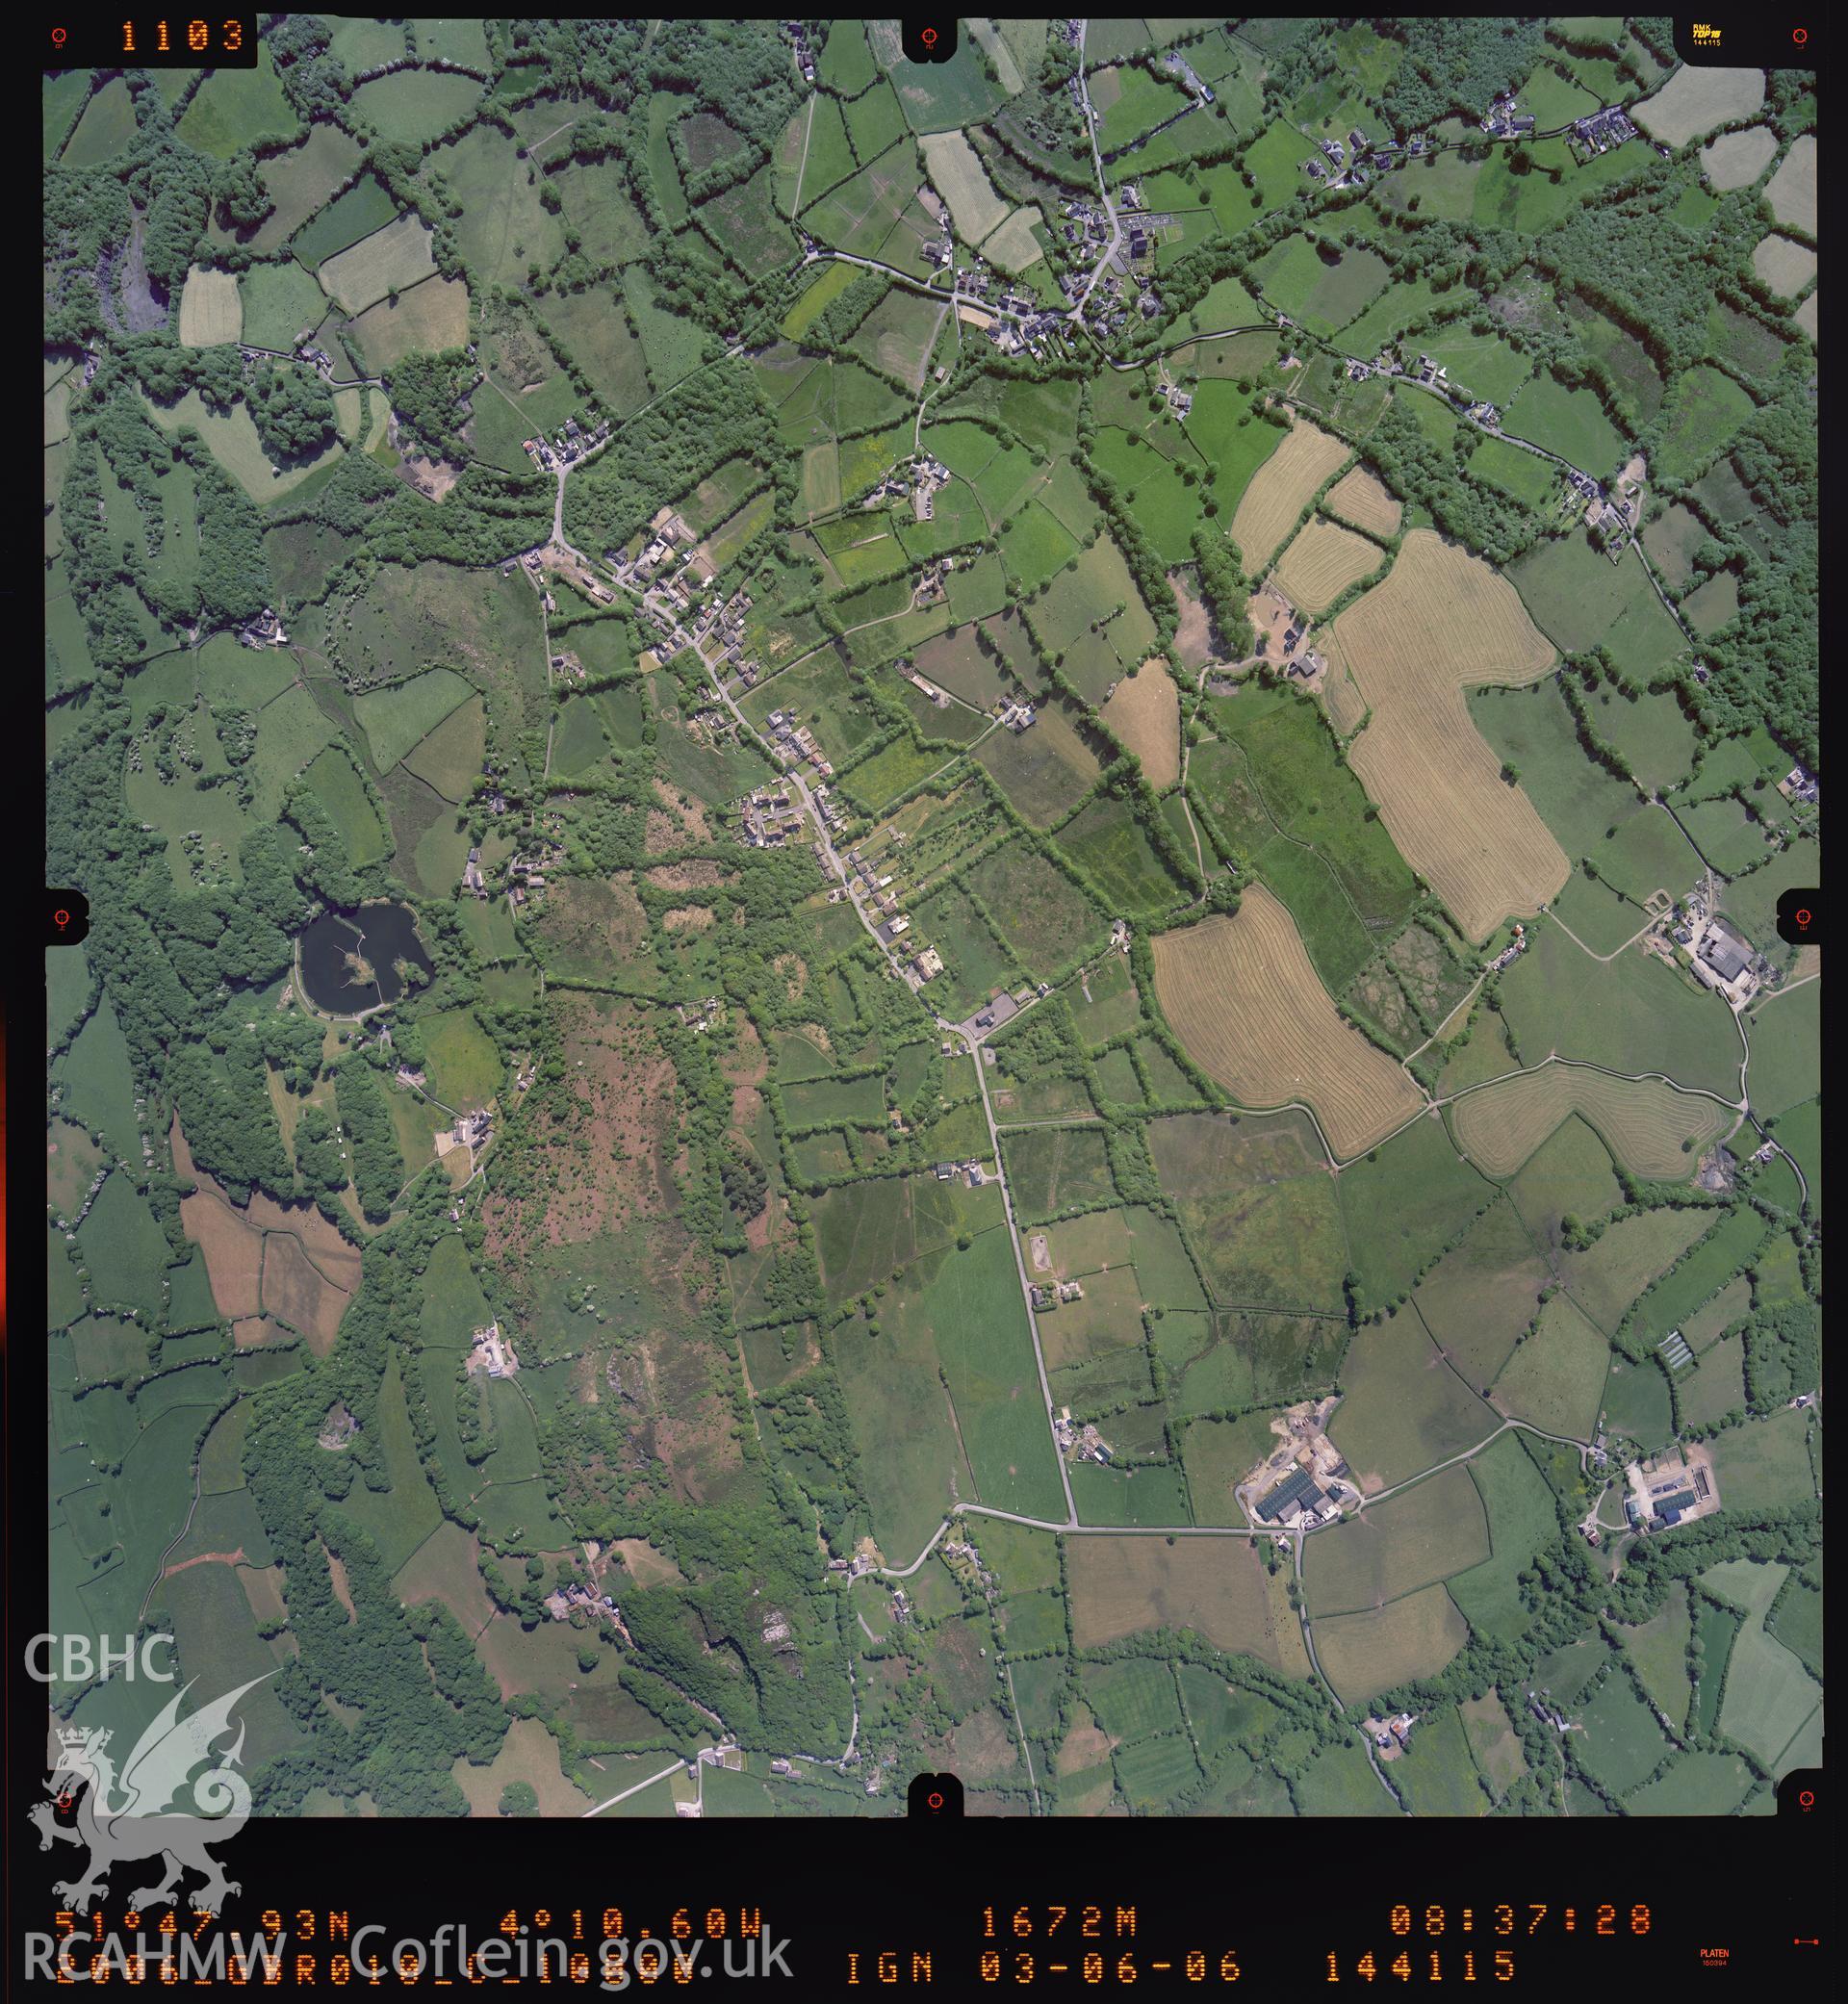 Digitized copy of a colour aerial photograph showing the area west of Drefach, taken by Ordnance Survey, 2006.